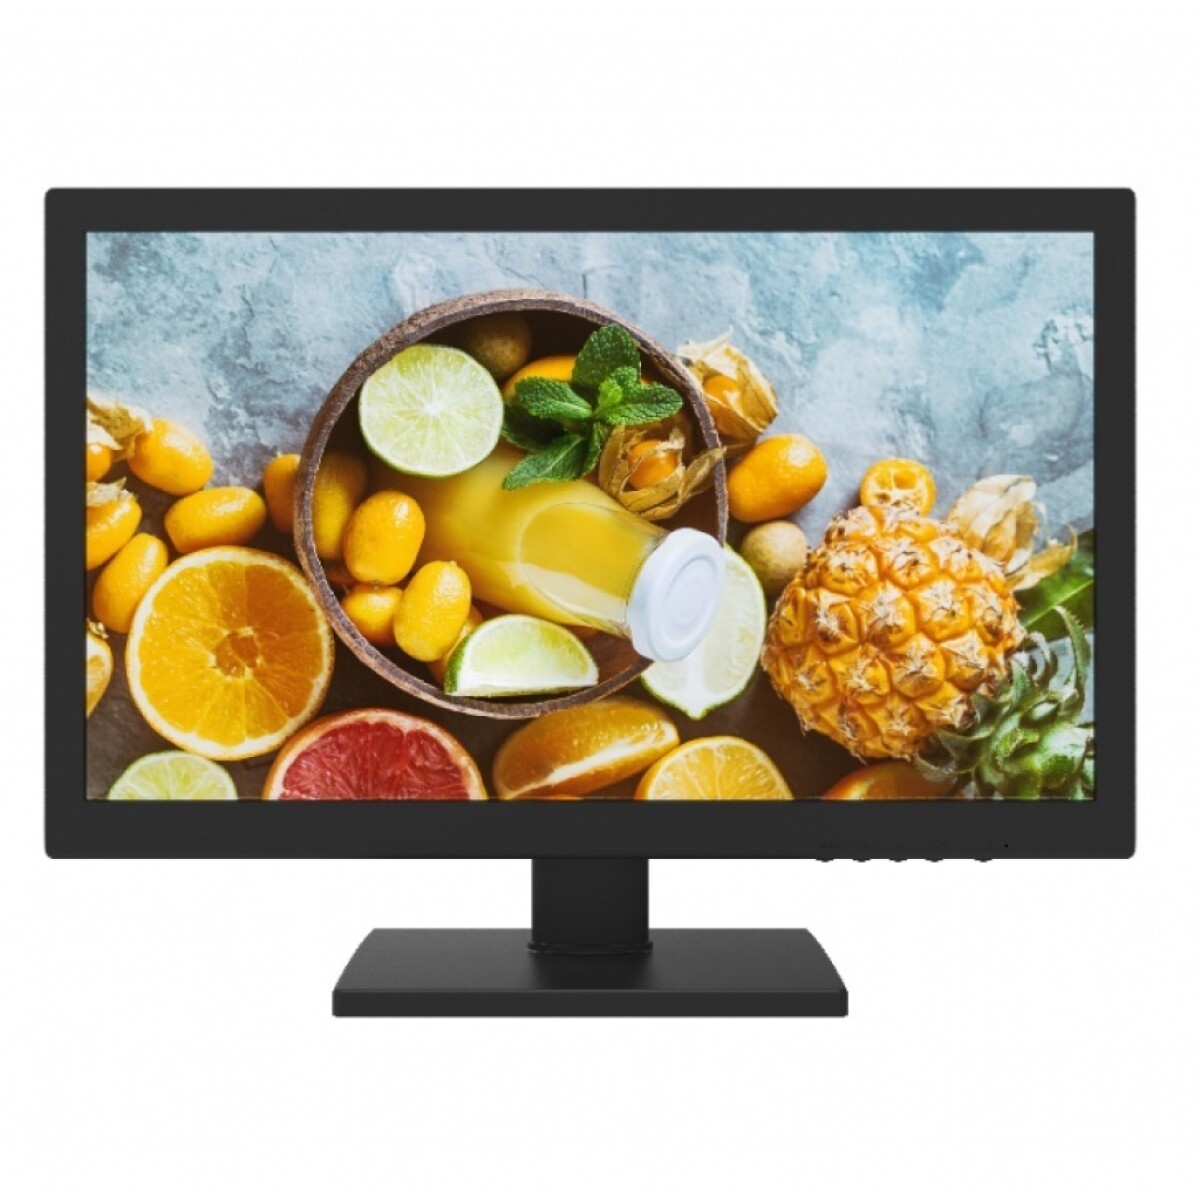 MONITOR HIKVISION 18.5" DS-D5019QE-B 